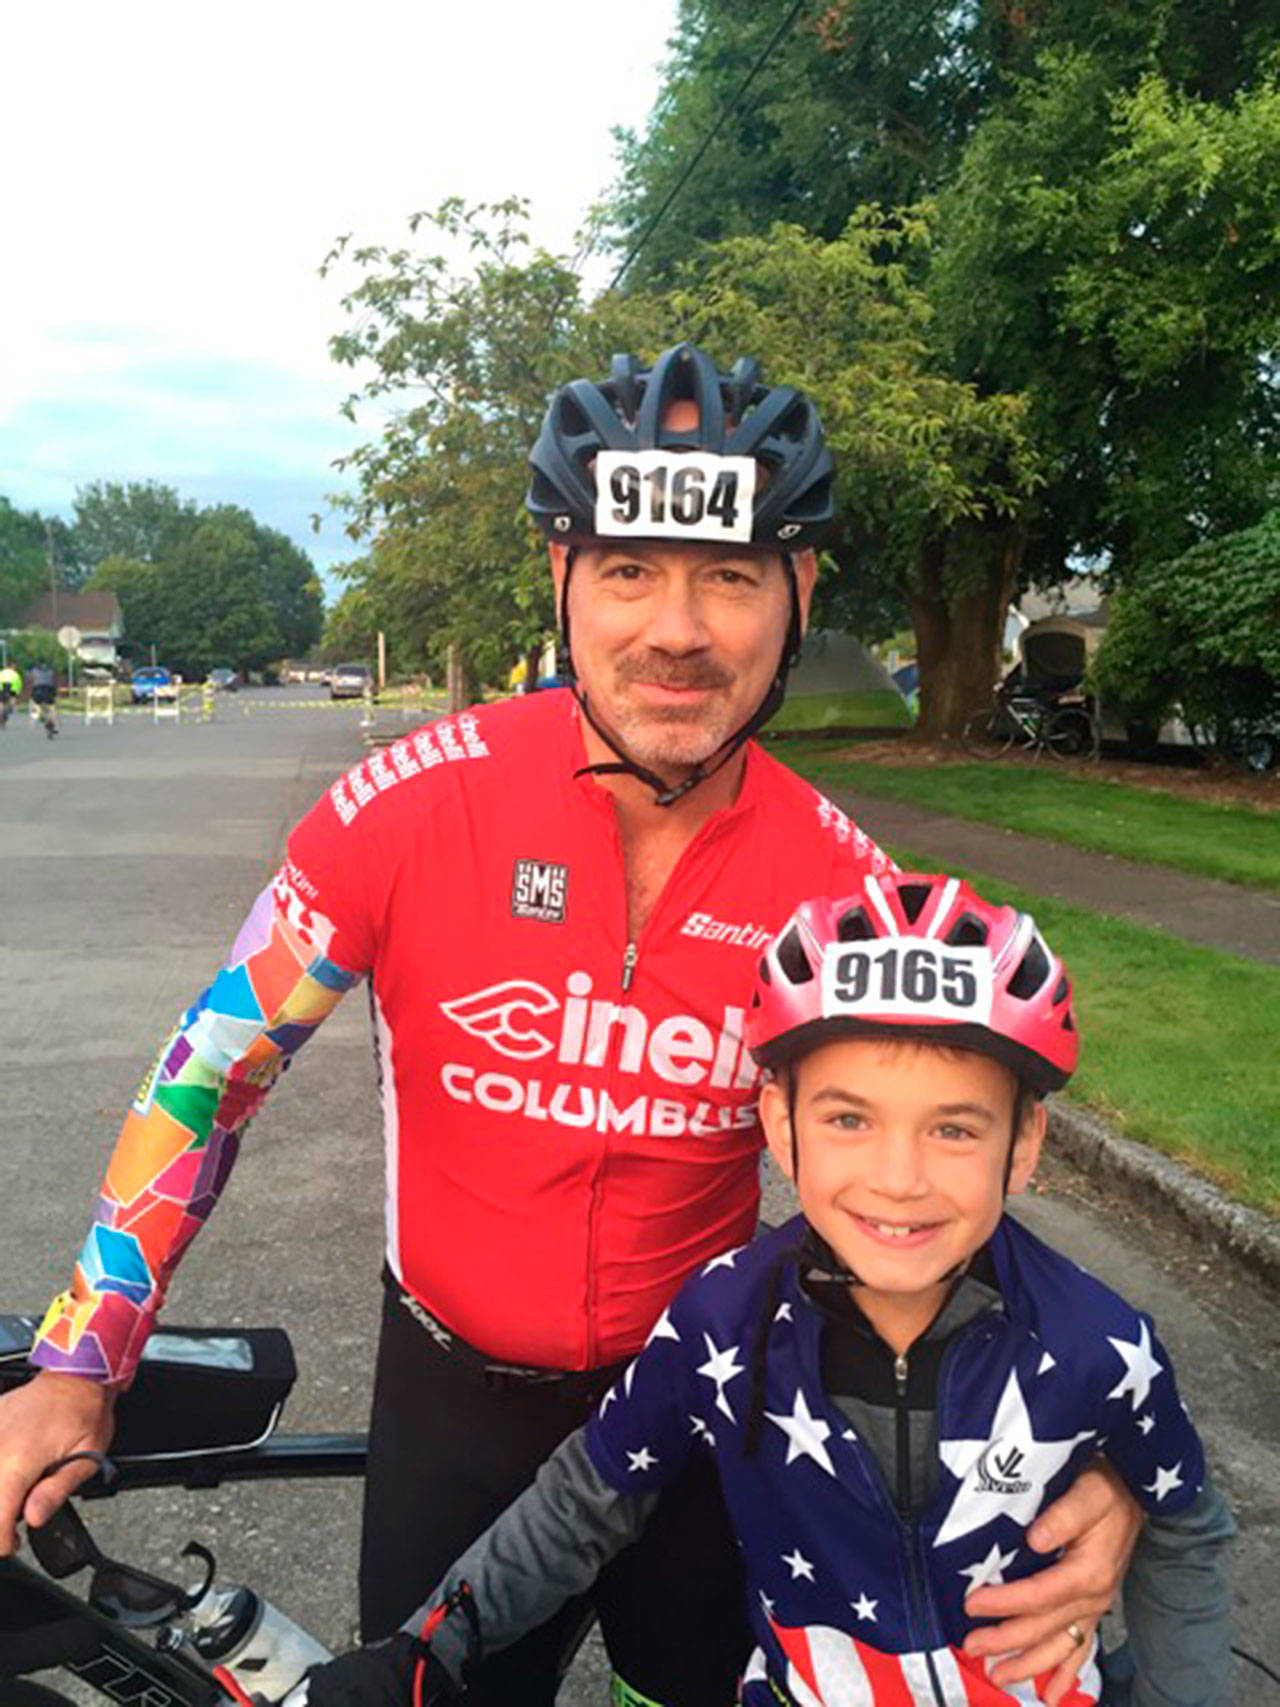 Photo courtesy of Kim Ring | Jeffrey Rogers and his son Julian, 10, during a recent ride. The young cyclist has racked up more than 500 miles in various group rides since 2015, all while struggling with serious hearing loss.